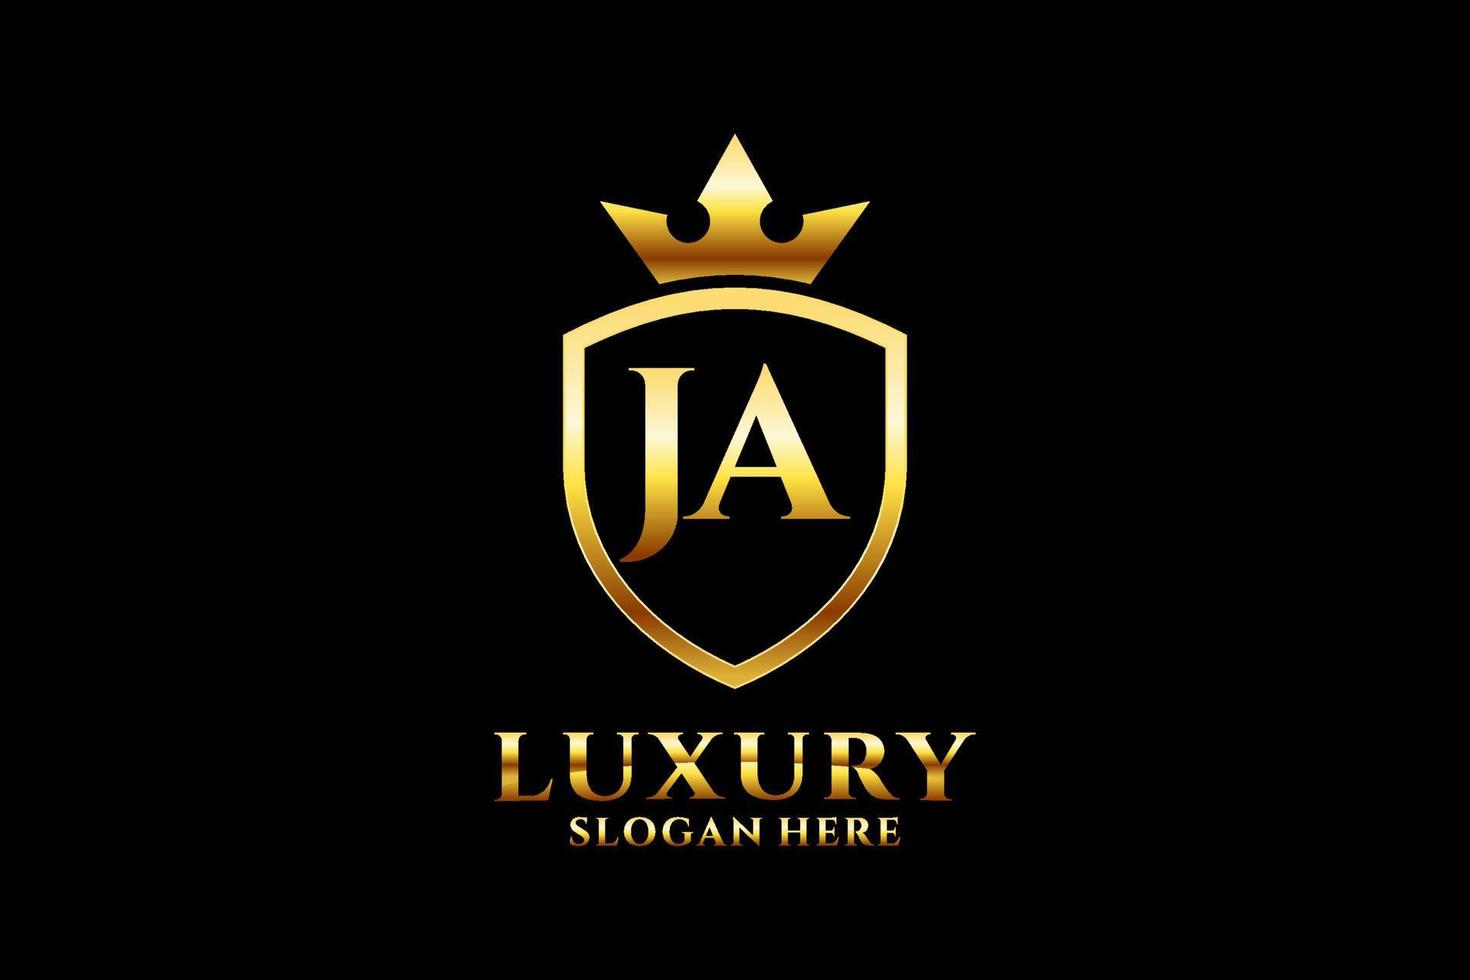 initial JA elegant luxury monogram logo or badge template with scrolls and royal crown - perfect for luxurious branding projects vector